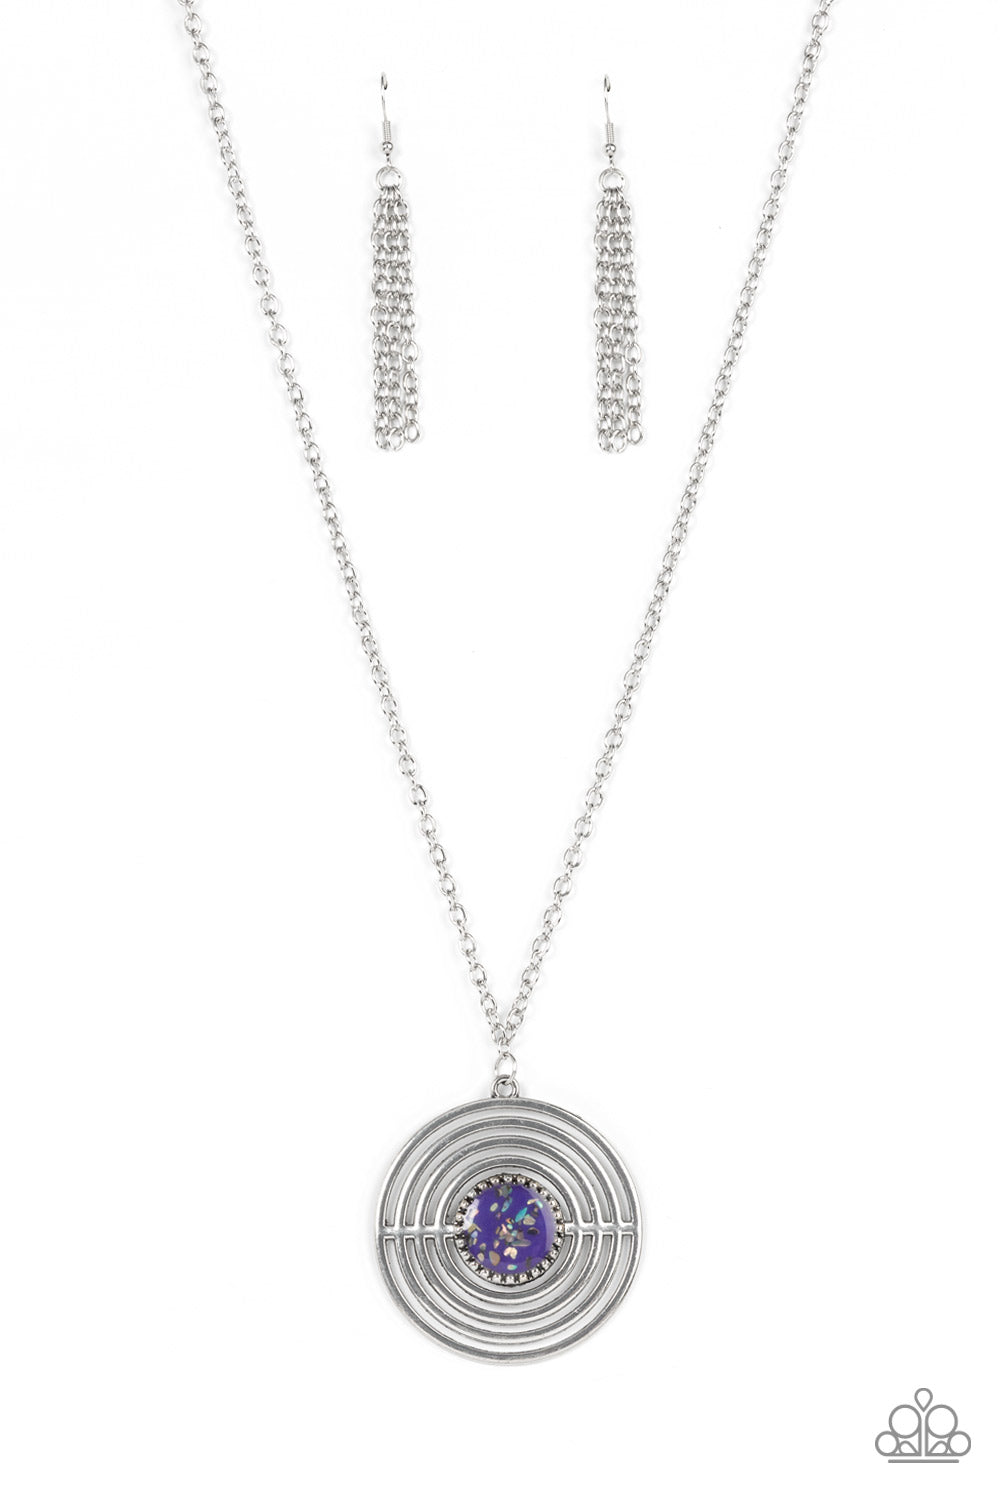 Targeted Tranquility - Purple necklace